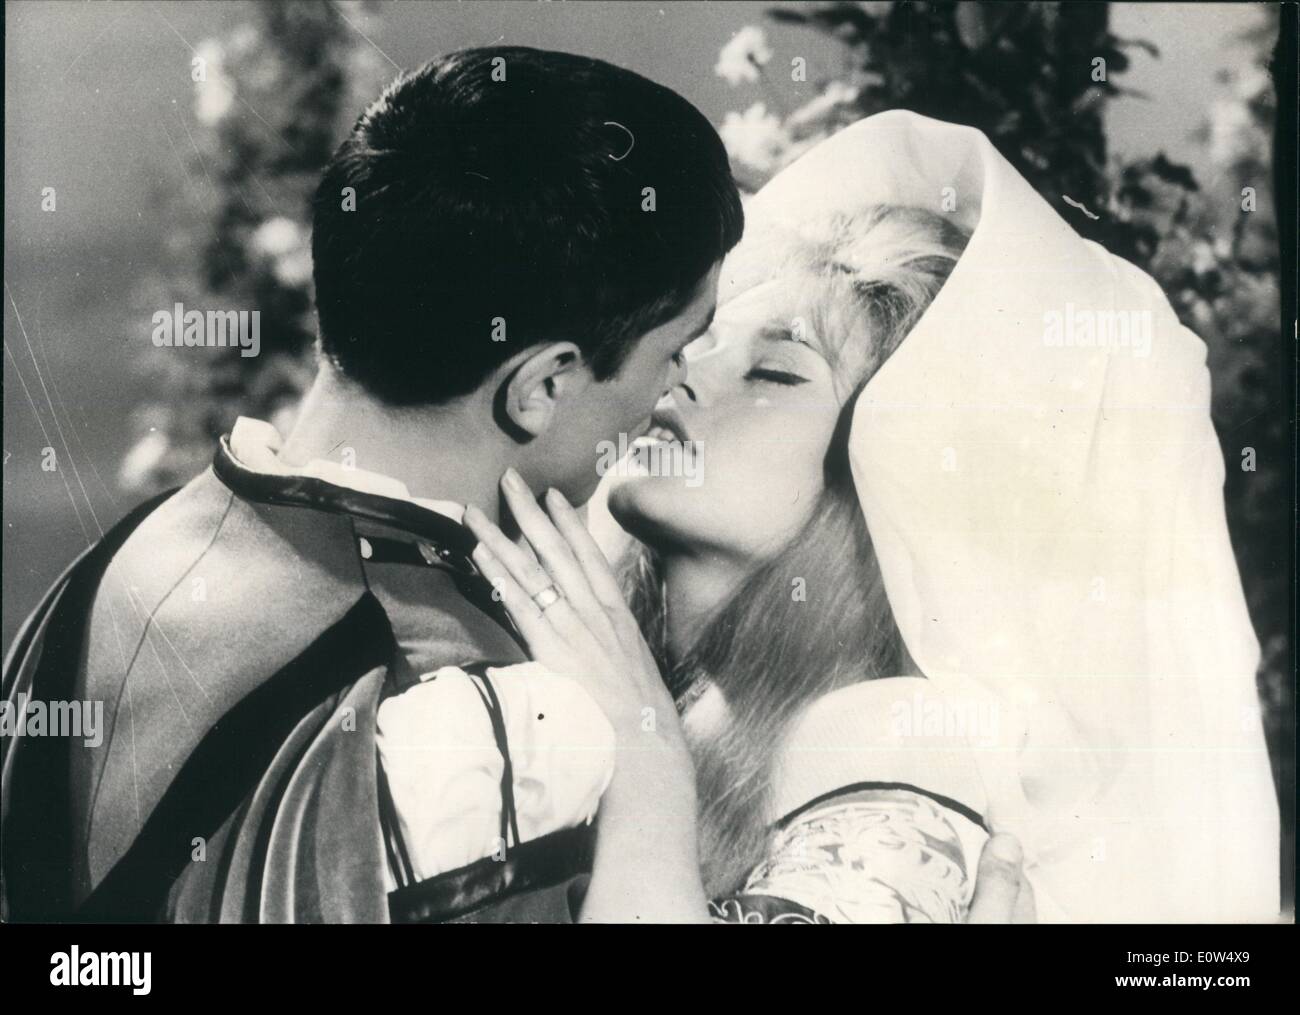 May 05, 1961 - Co-stars with Alain Delon in ''Famous Lovers'': Brigitte Bardot Stars in one of the sketches of the film ''Famous Lovers'' reviving some famous Romances throughout Centuries. B.B. Impersonates a young Bavarian Girl with whom Prince Albert of Bavaria (Alain Delon) falls in love. The ivers come to a tragic end. Photo shows Brigitte Bardot and Alain Delon in a scene of the film. Stock Photo